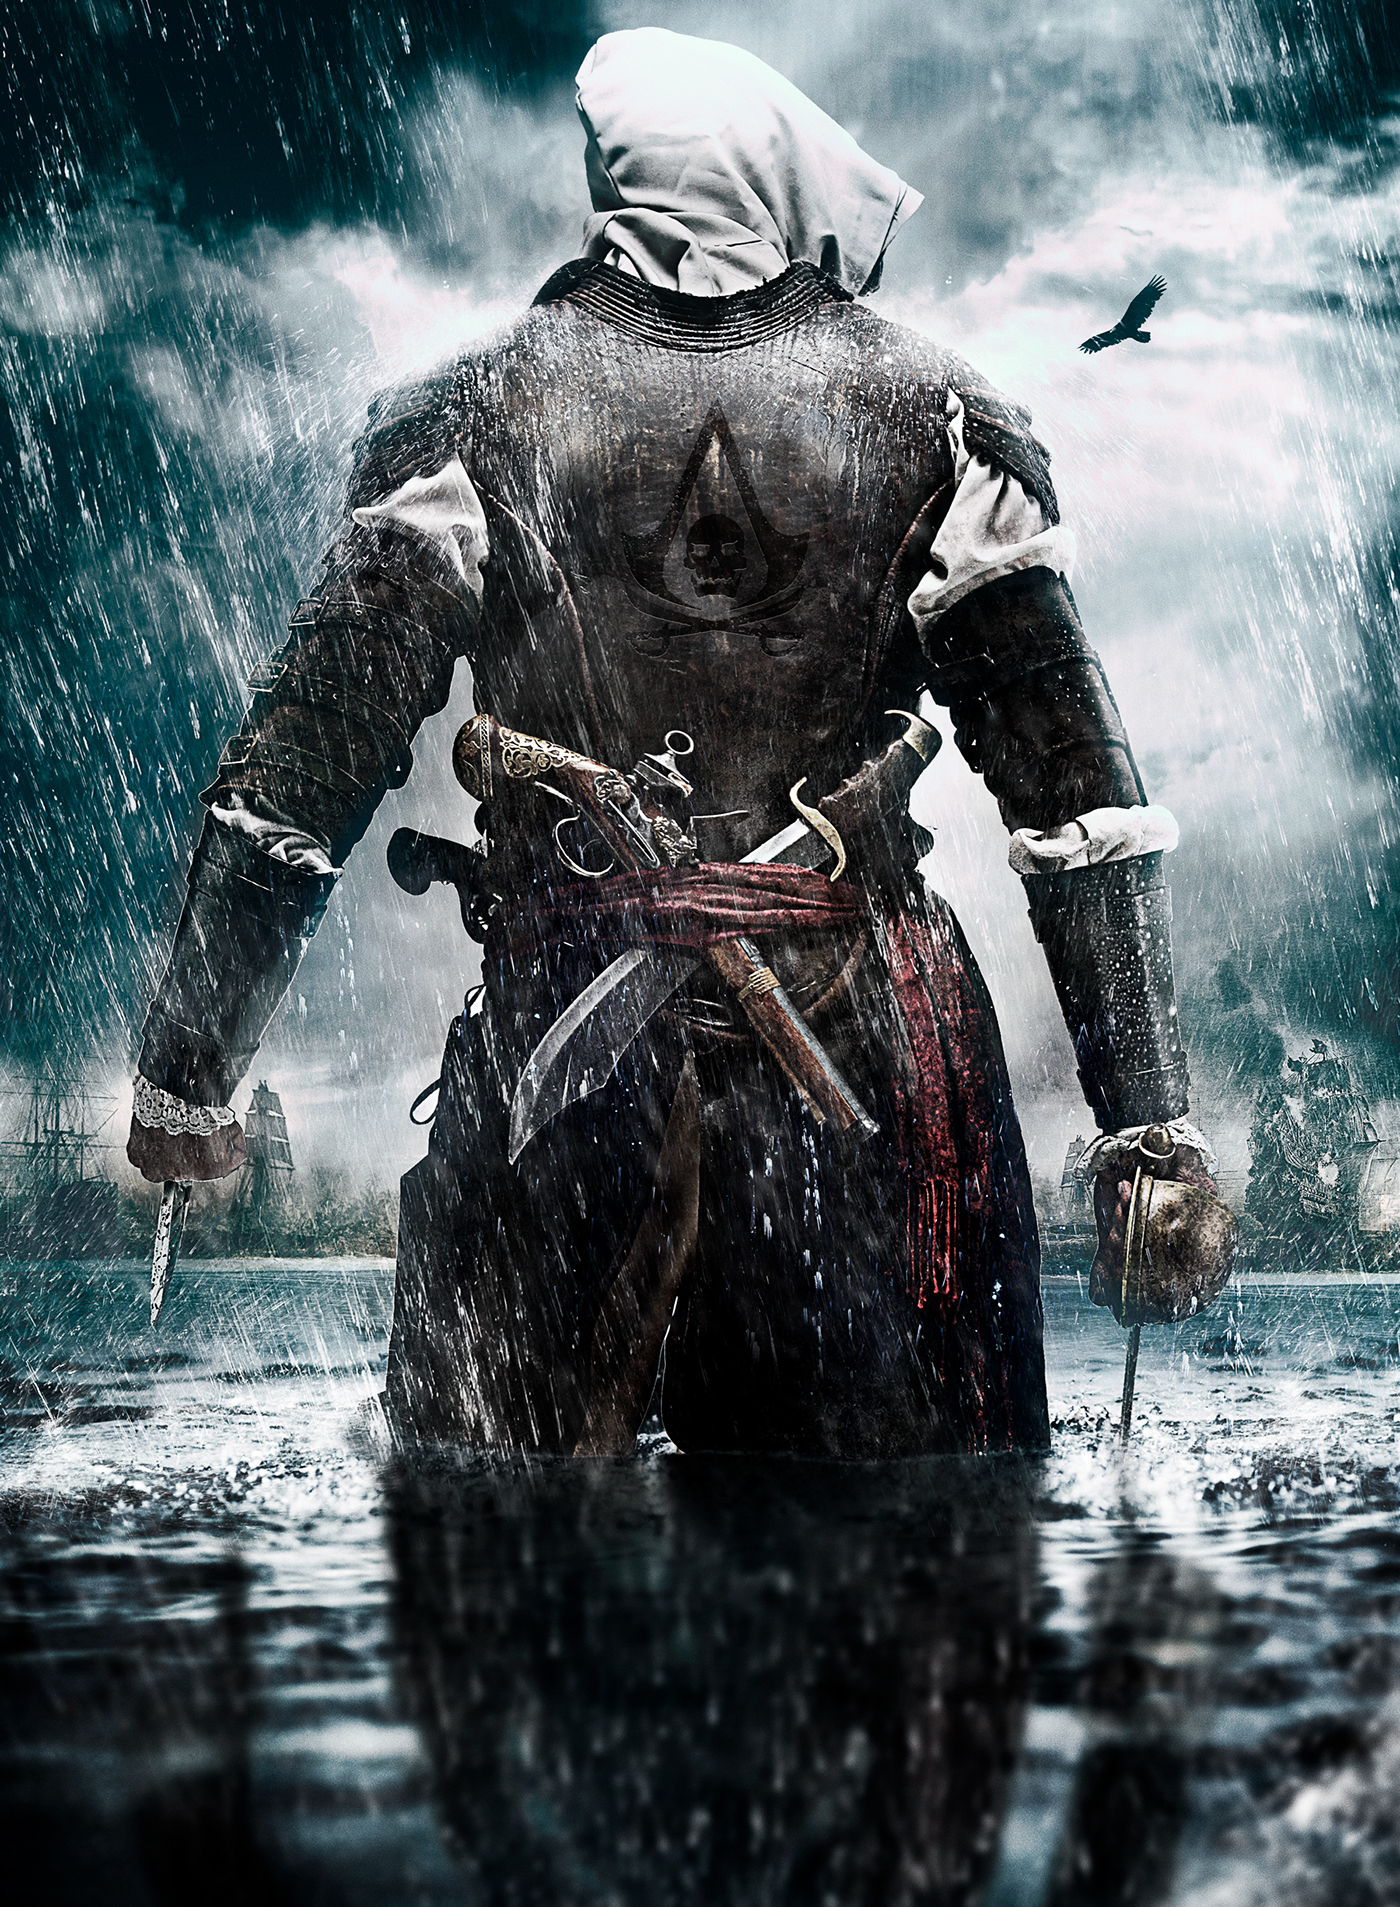 The Art of Assassin's Creed IV: Black Flag